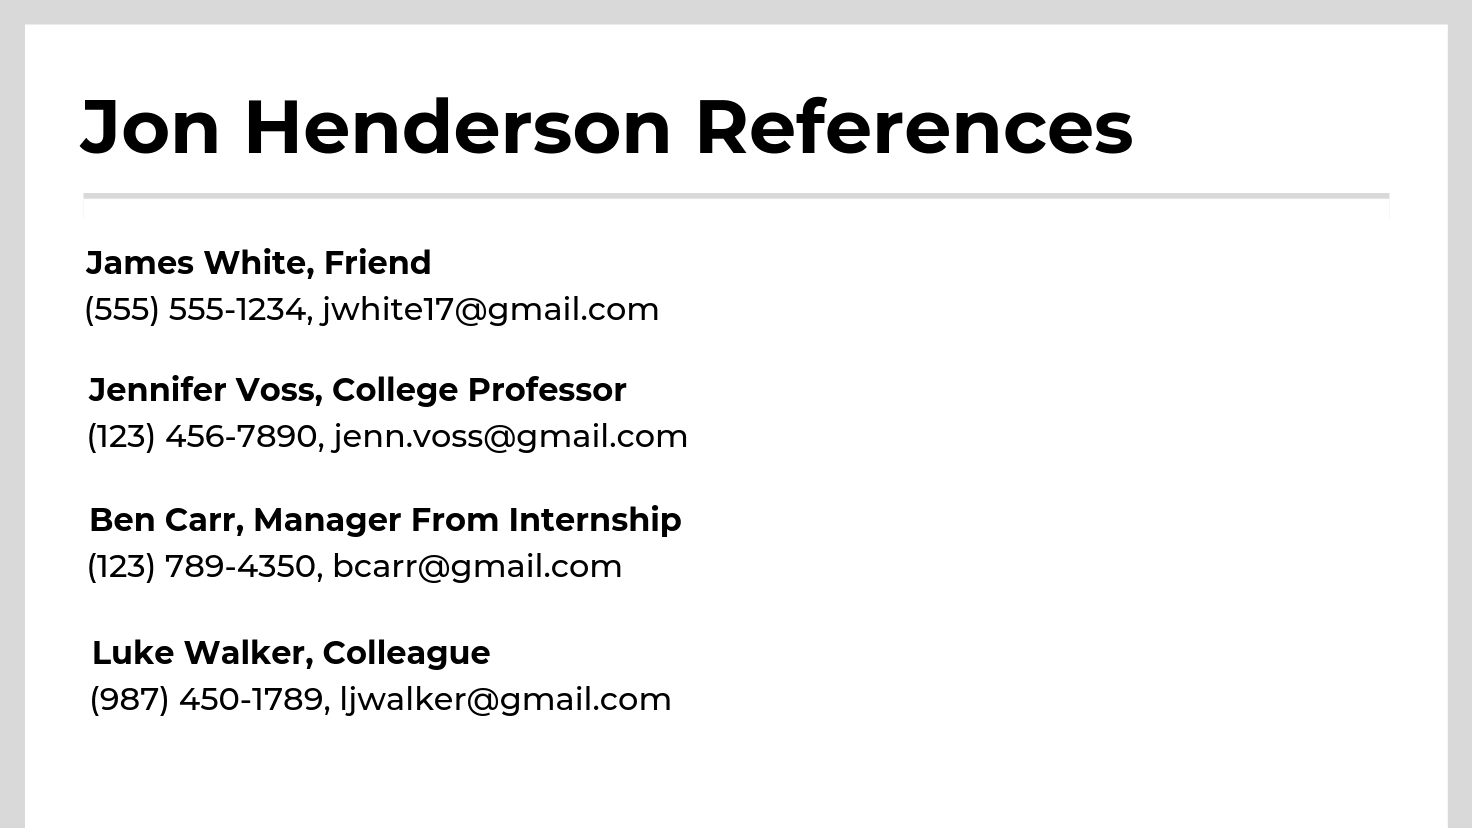 Example of bad format or references on resume